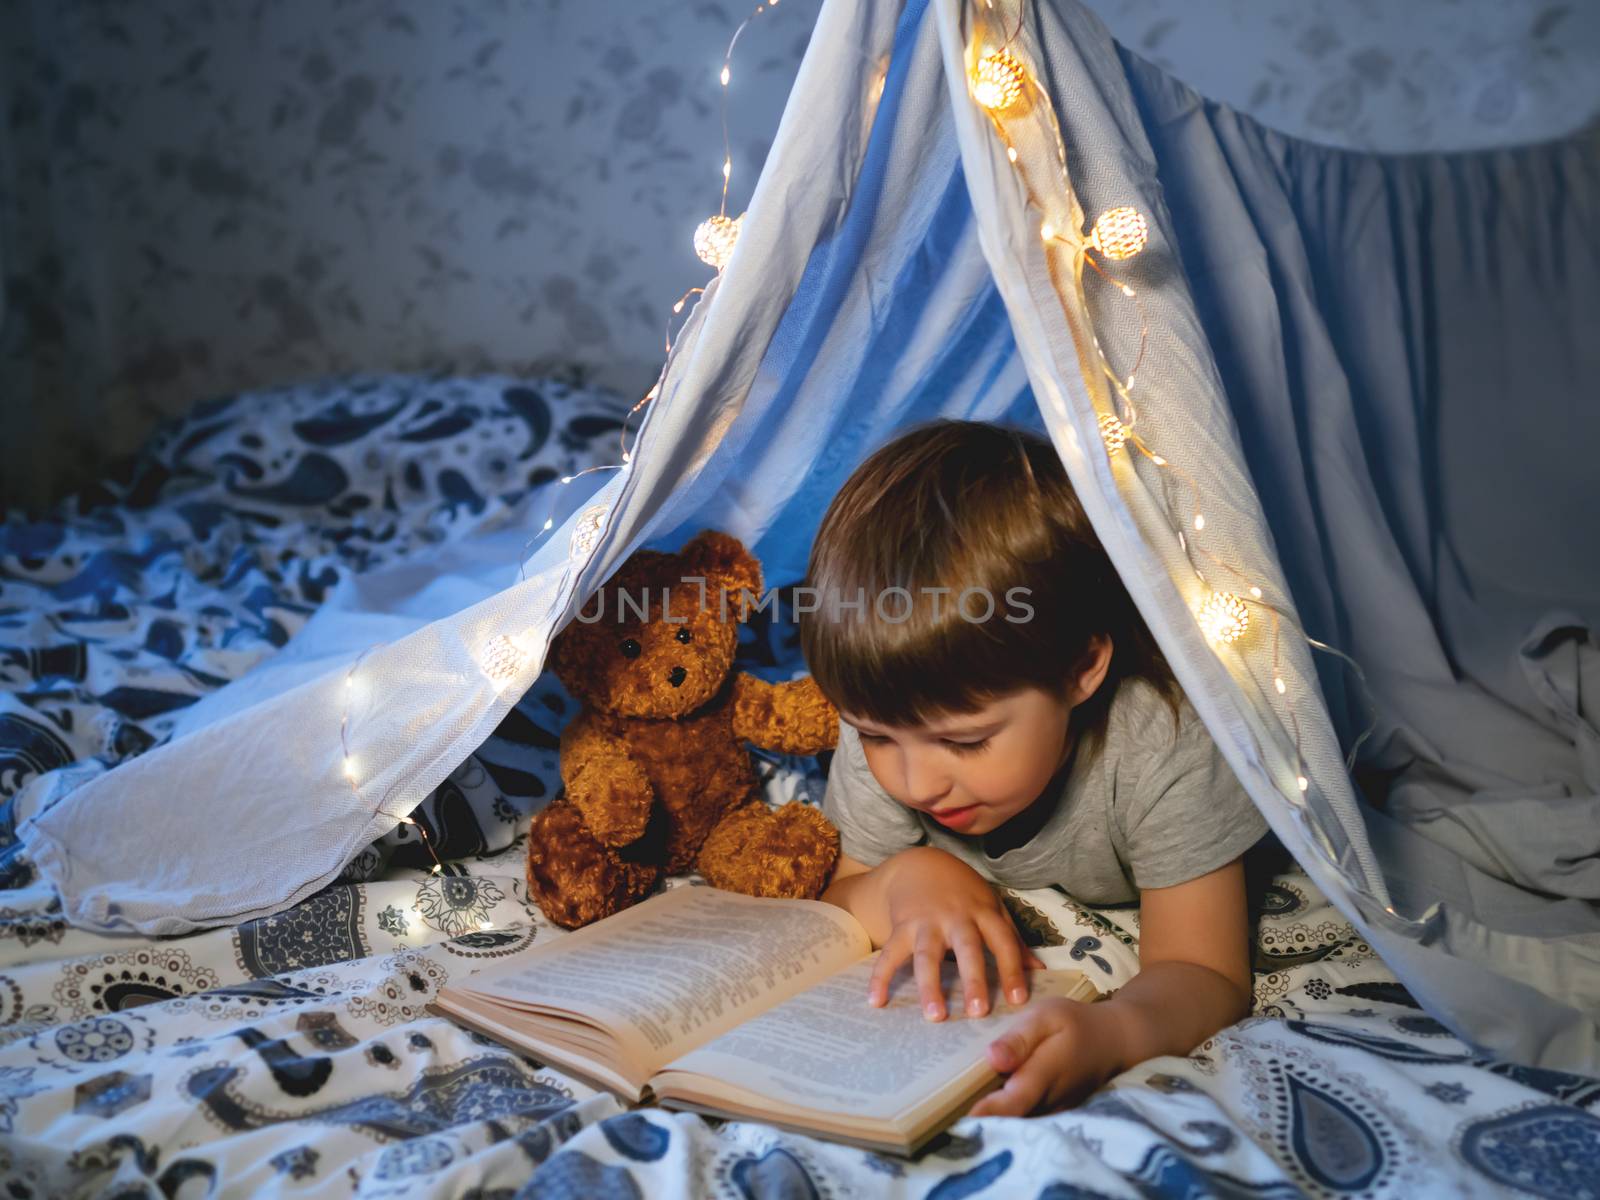 Little boy reads book. Toddler plays in tent made of linen sheet on bed. Cozy evening with favorite book.